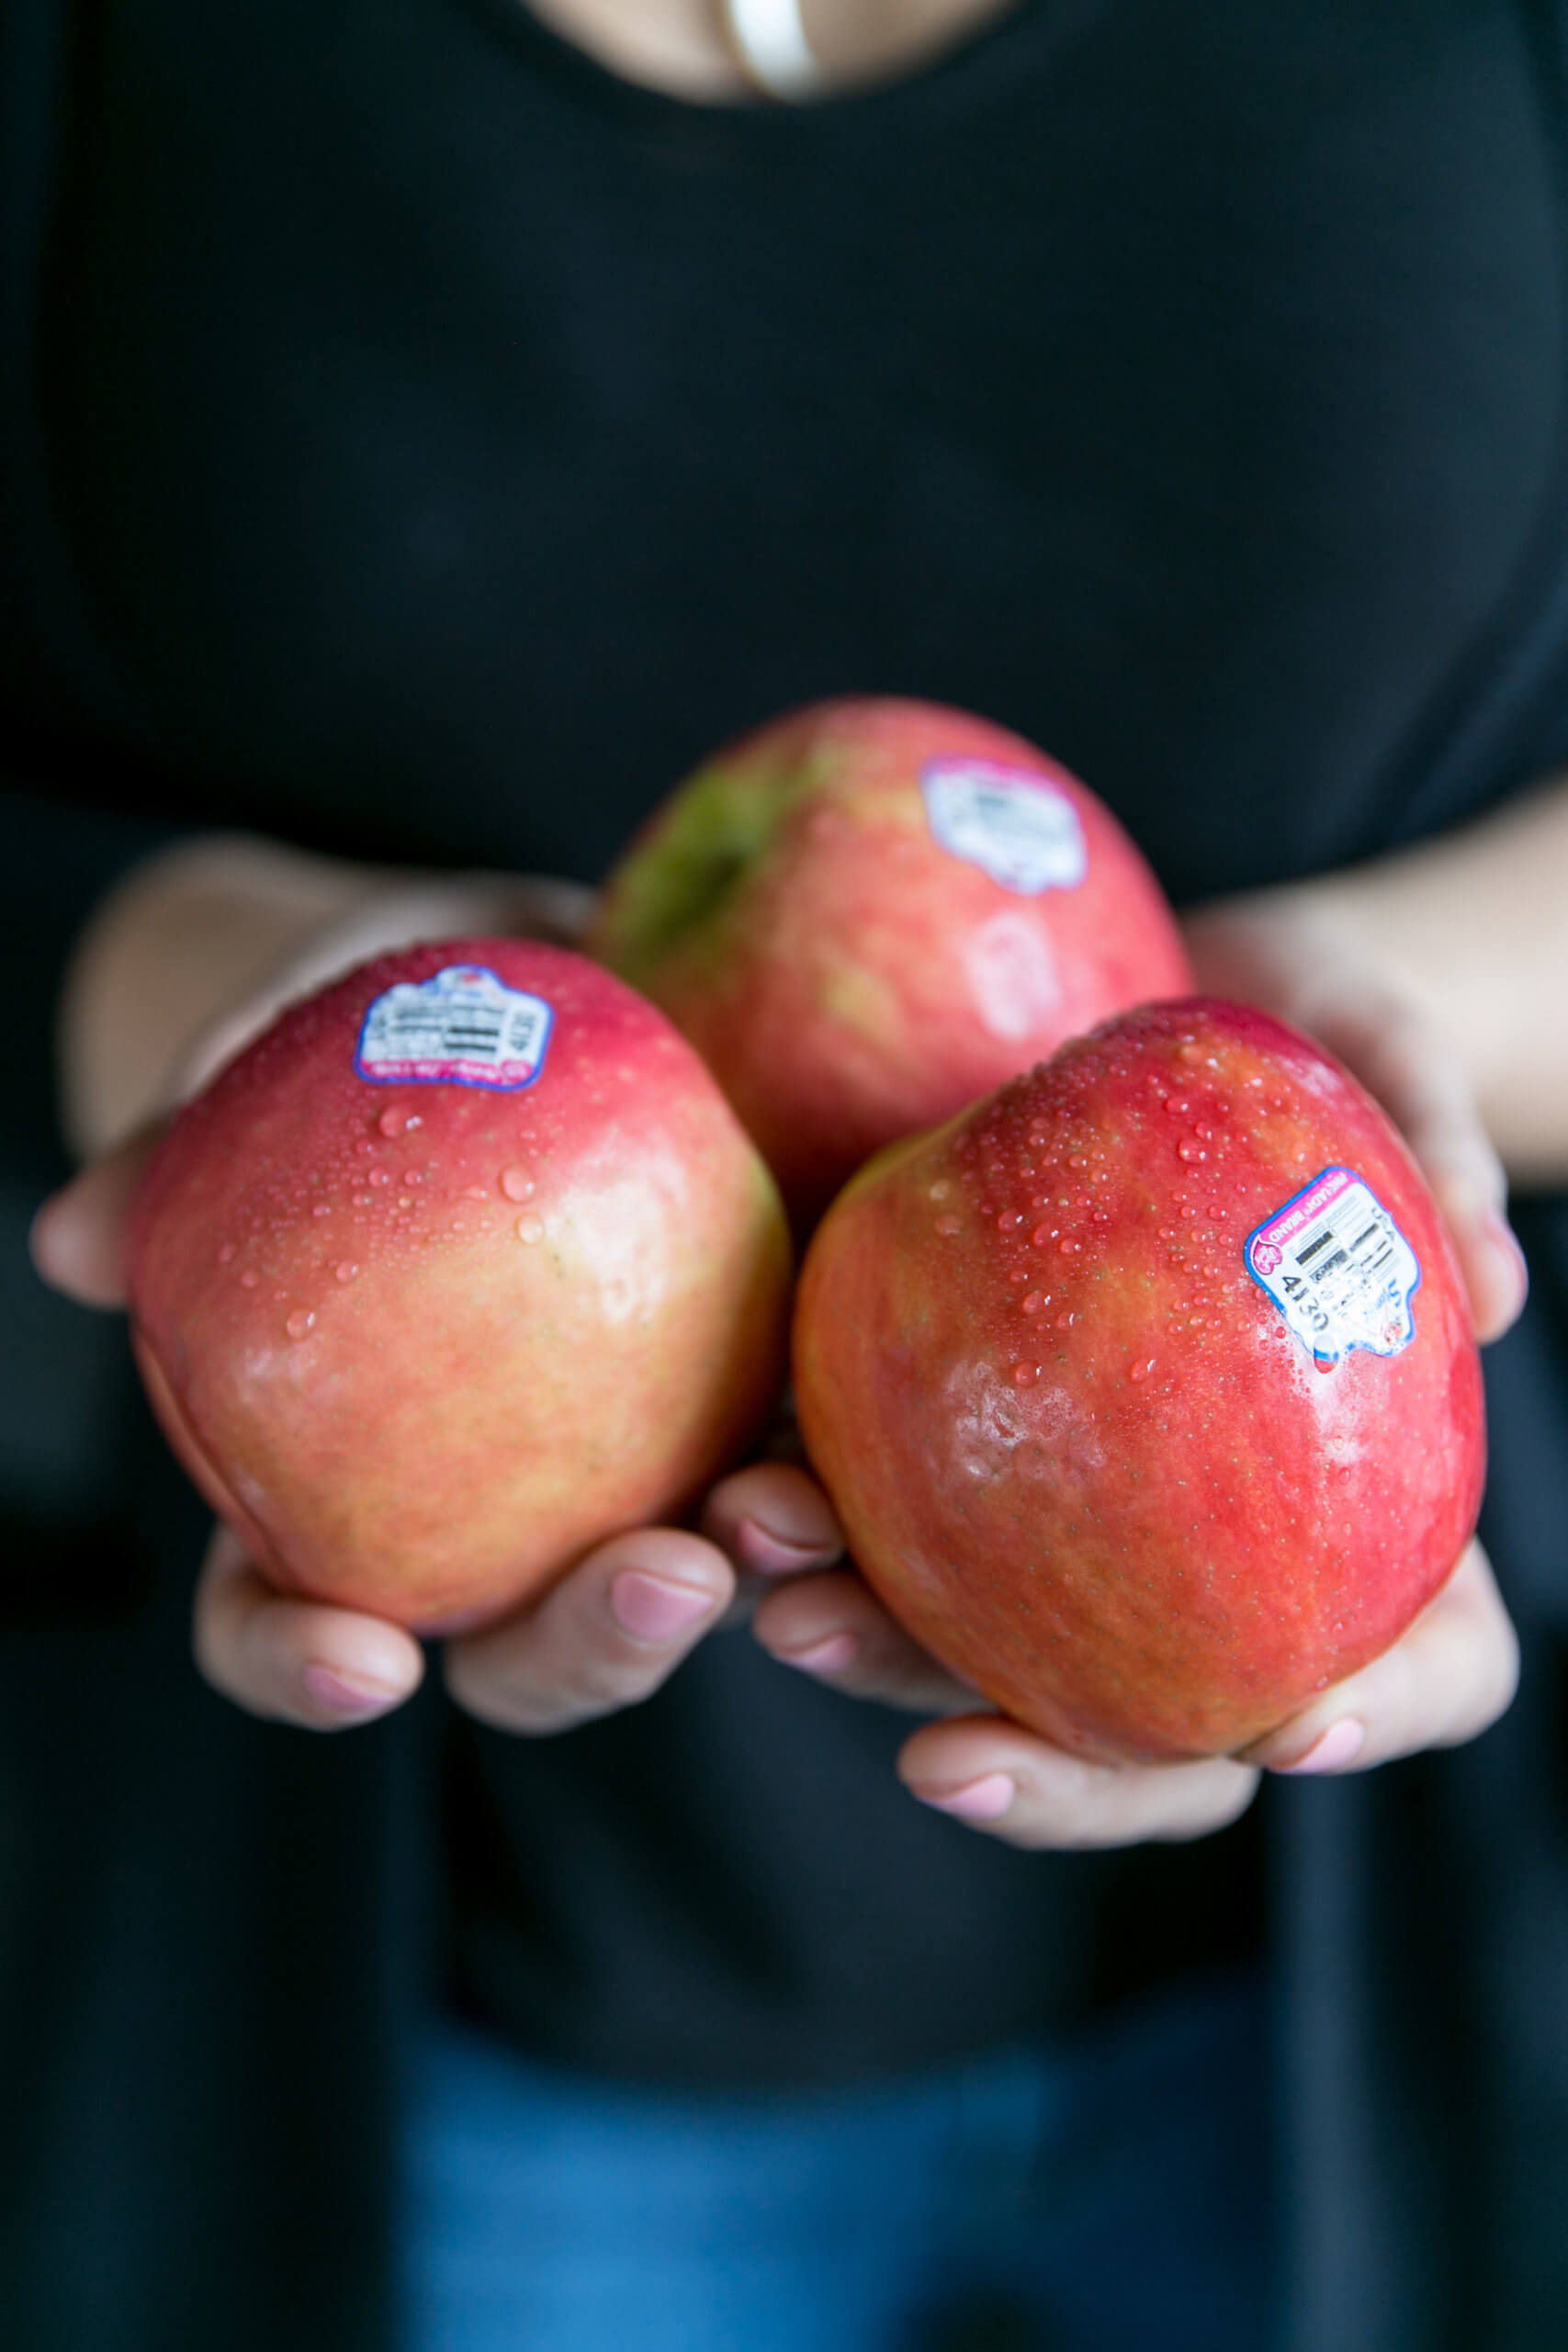 Pink Lady apples in someone's hands